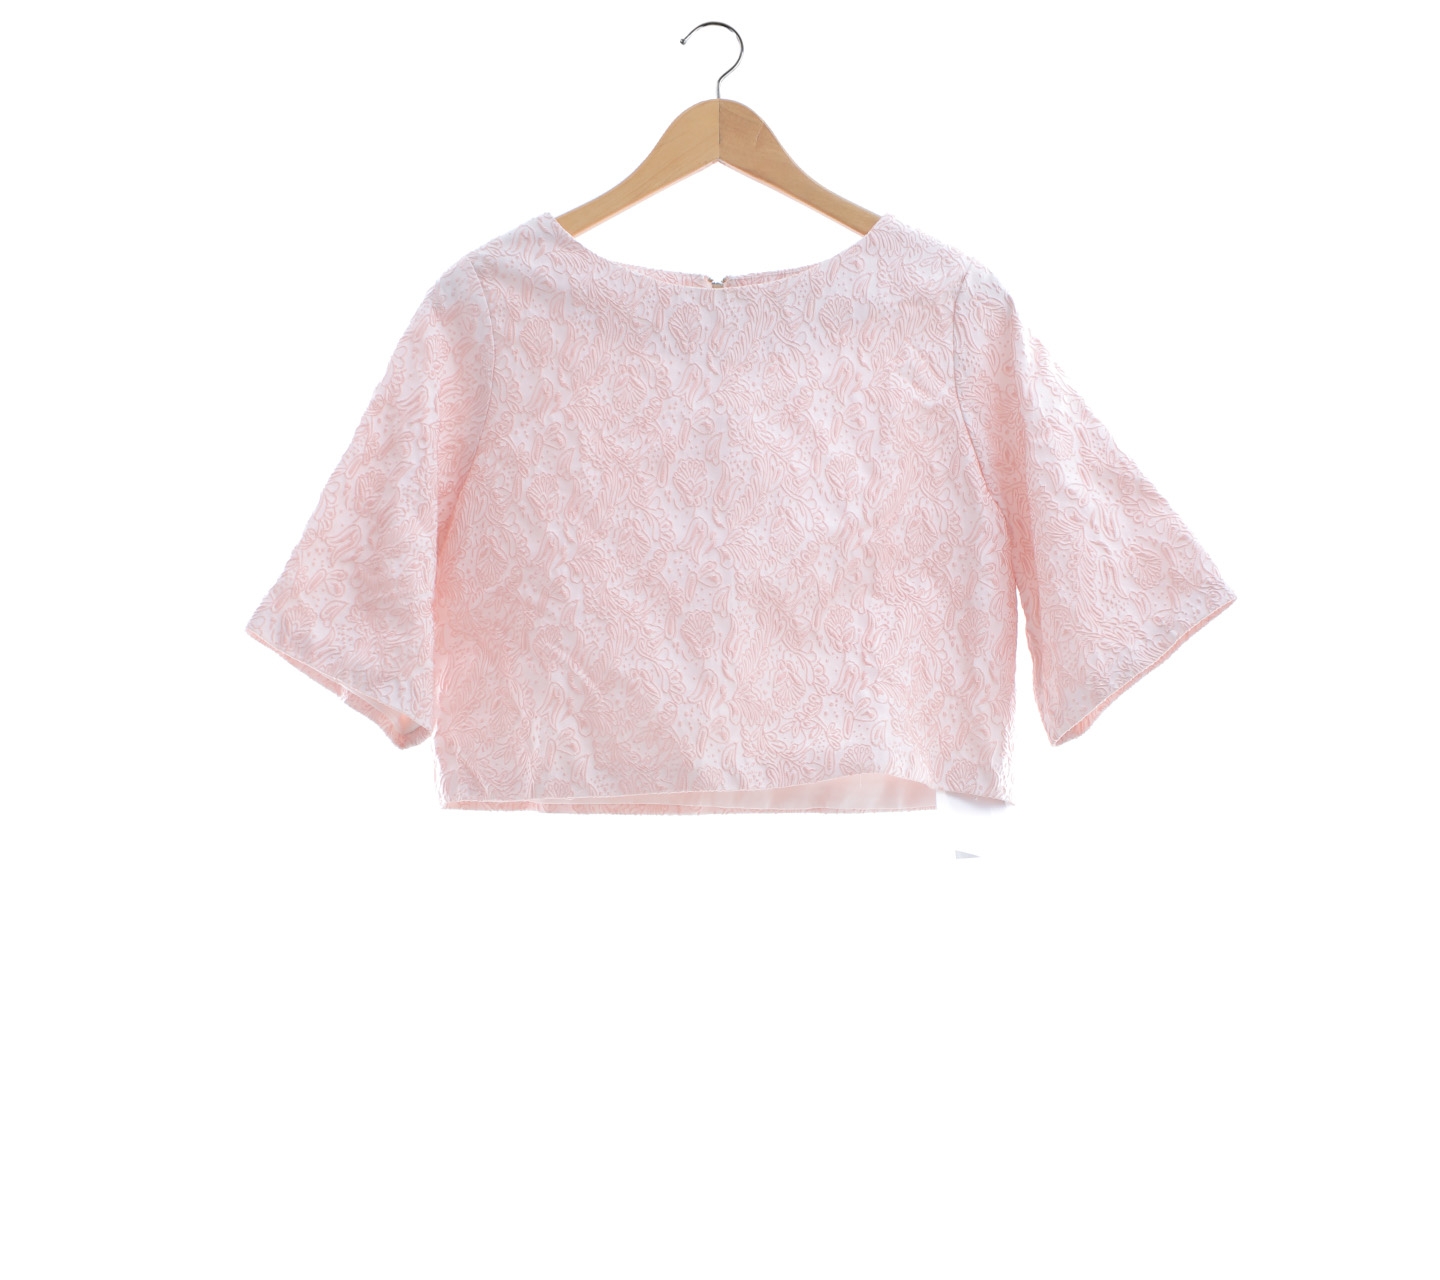 All Prim Up Patterned Peach Blouse